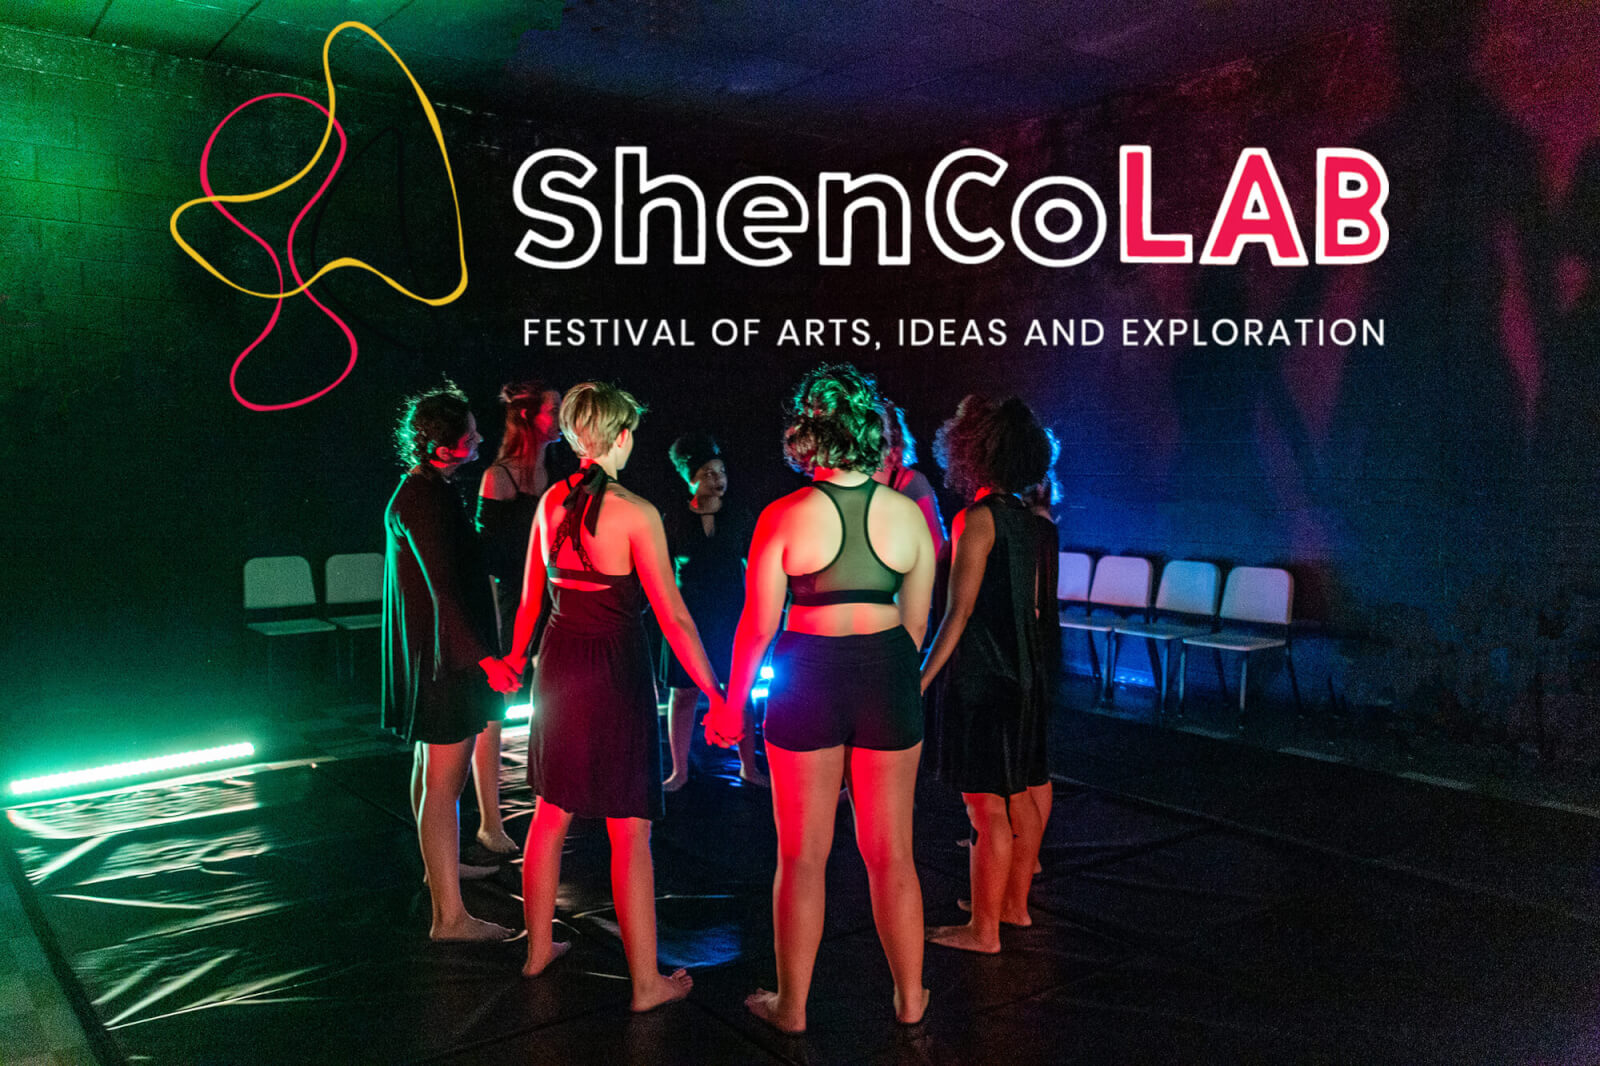 America’s ONLY Performing Arts Schoolwide Student Festival Returns to Shenandoah Conservatory! ShenCoLAB: Festival of Arts, Ideas and Exploration features 22 original student projects involving 200+ student collaborators at seven venues across campus in daylong festival 